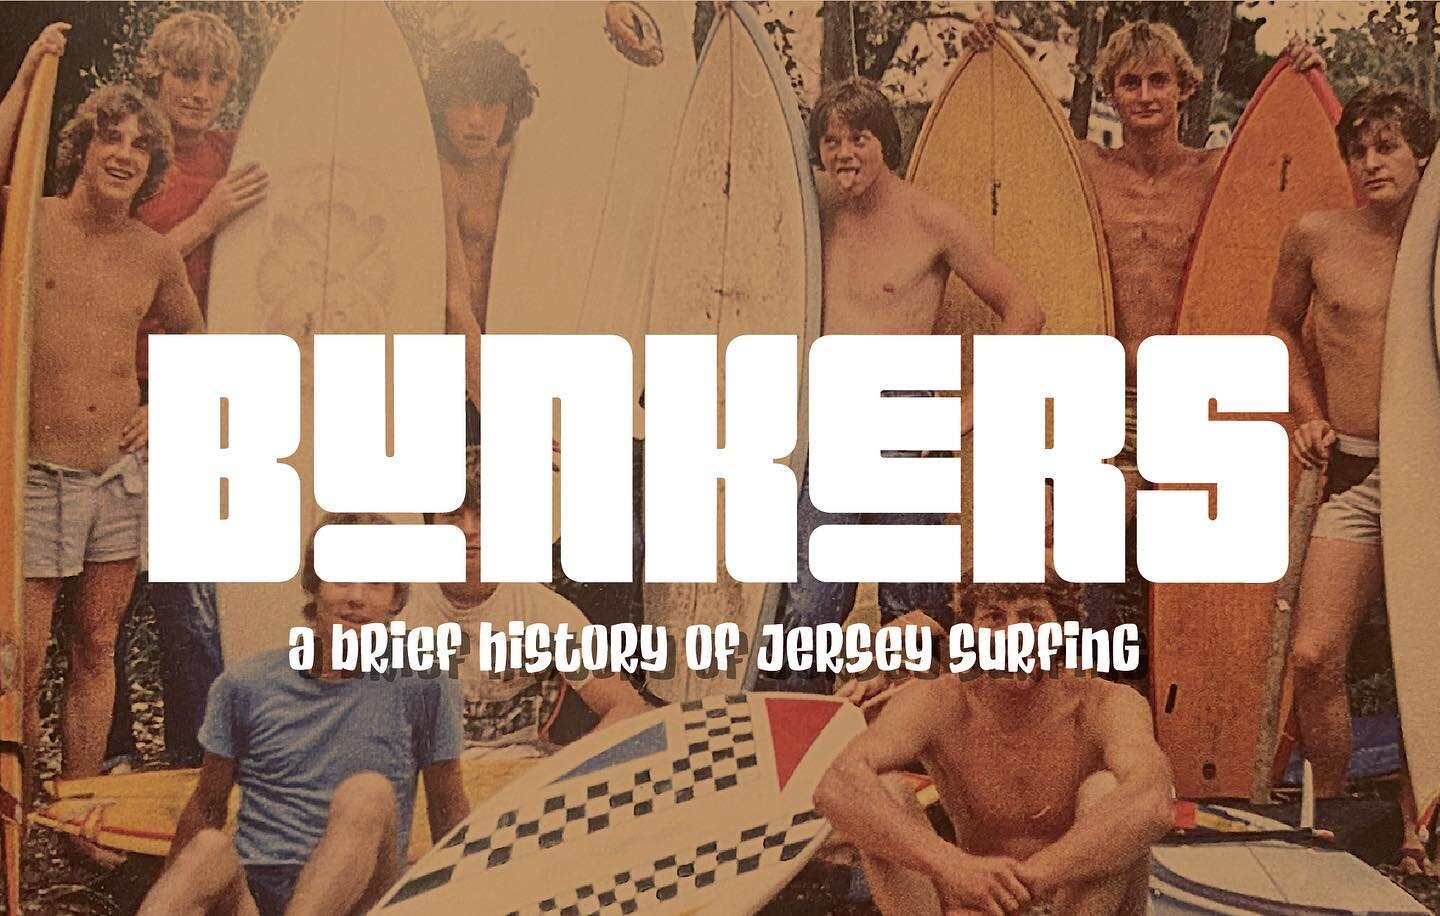 Join us Saturday night @cineworld Jersey for our screening of BUNKERS- a brief history of surfing in Jersey. Tickets via link in bio. Doors from 5:30pm - photography exhibition &amp; free drink plus paid bar! Films start 7:30pm 

HUGE Thanks to
@arth